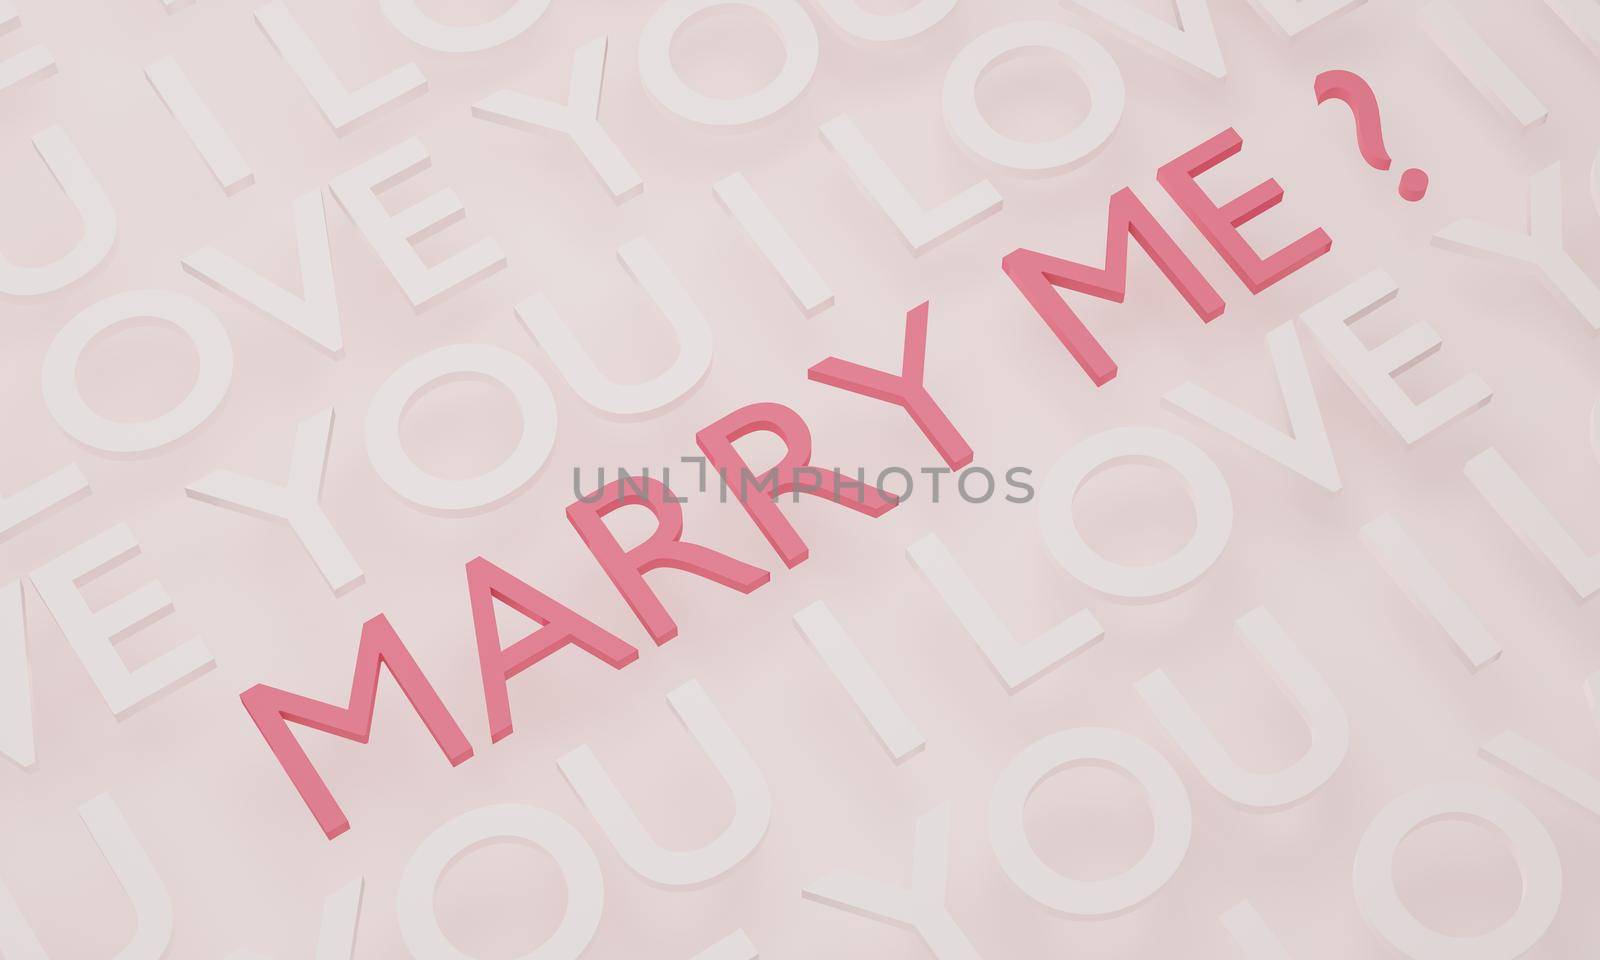 Will You Marry Me, pink text on white wall background. 3D rendering. by sirawit99